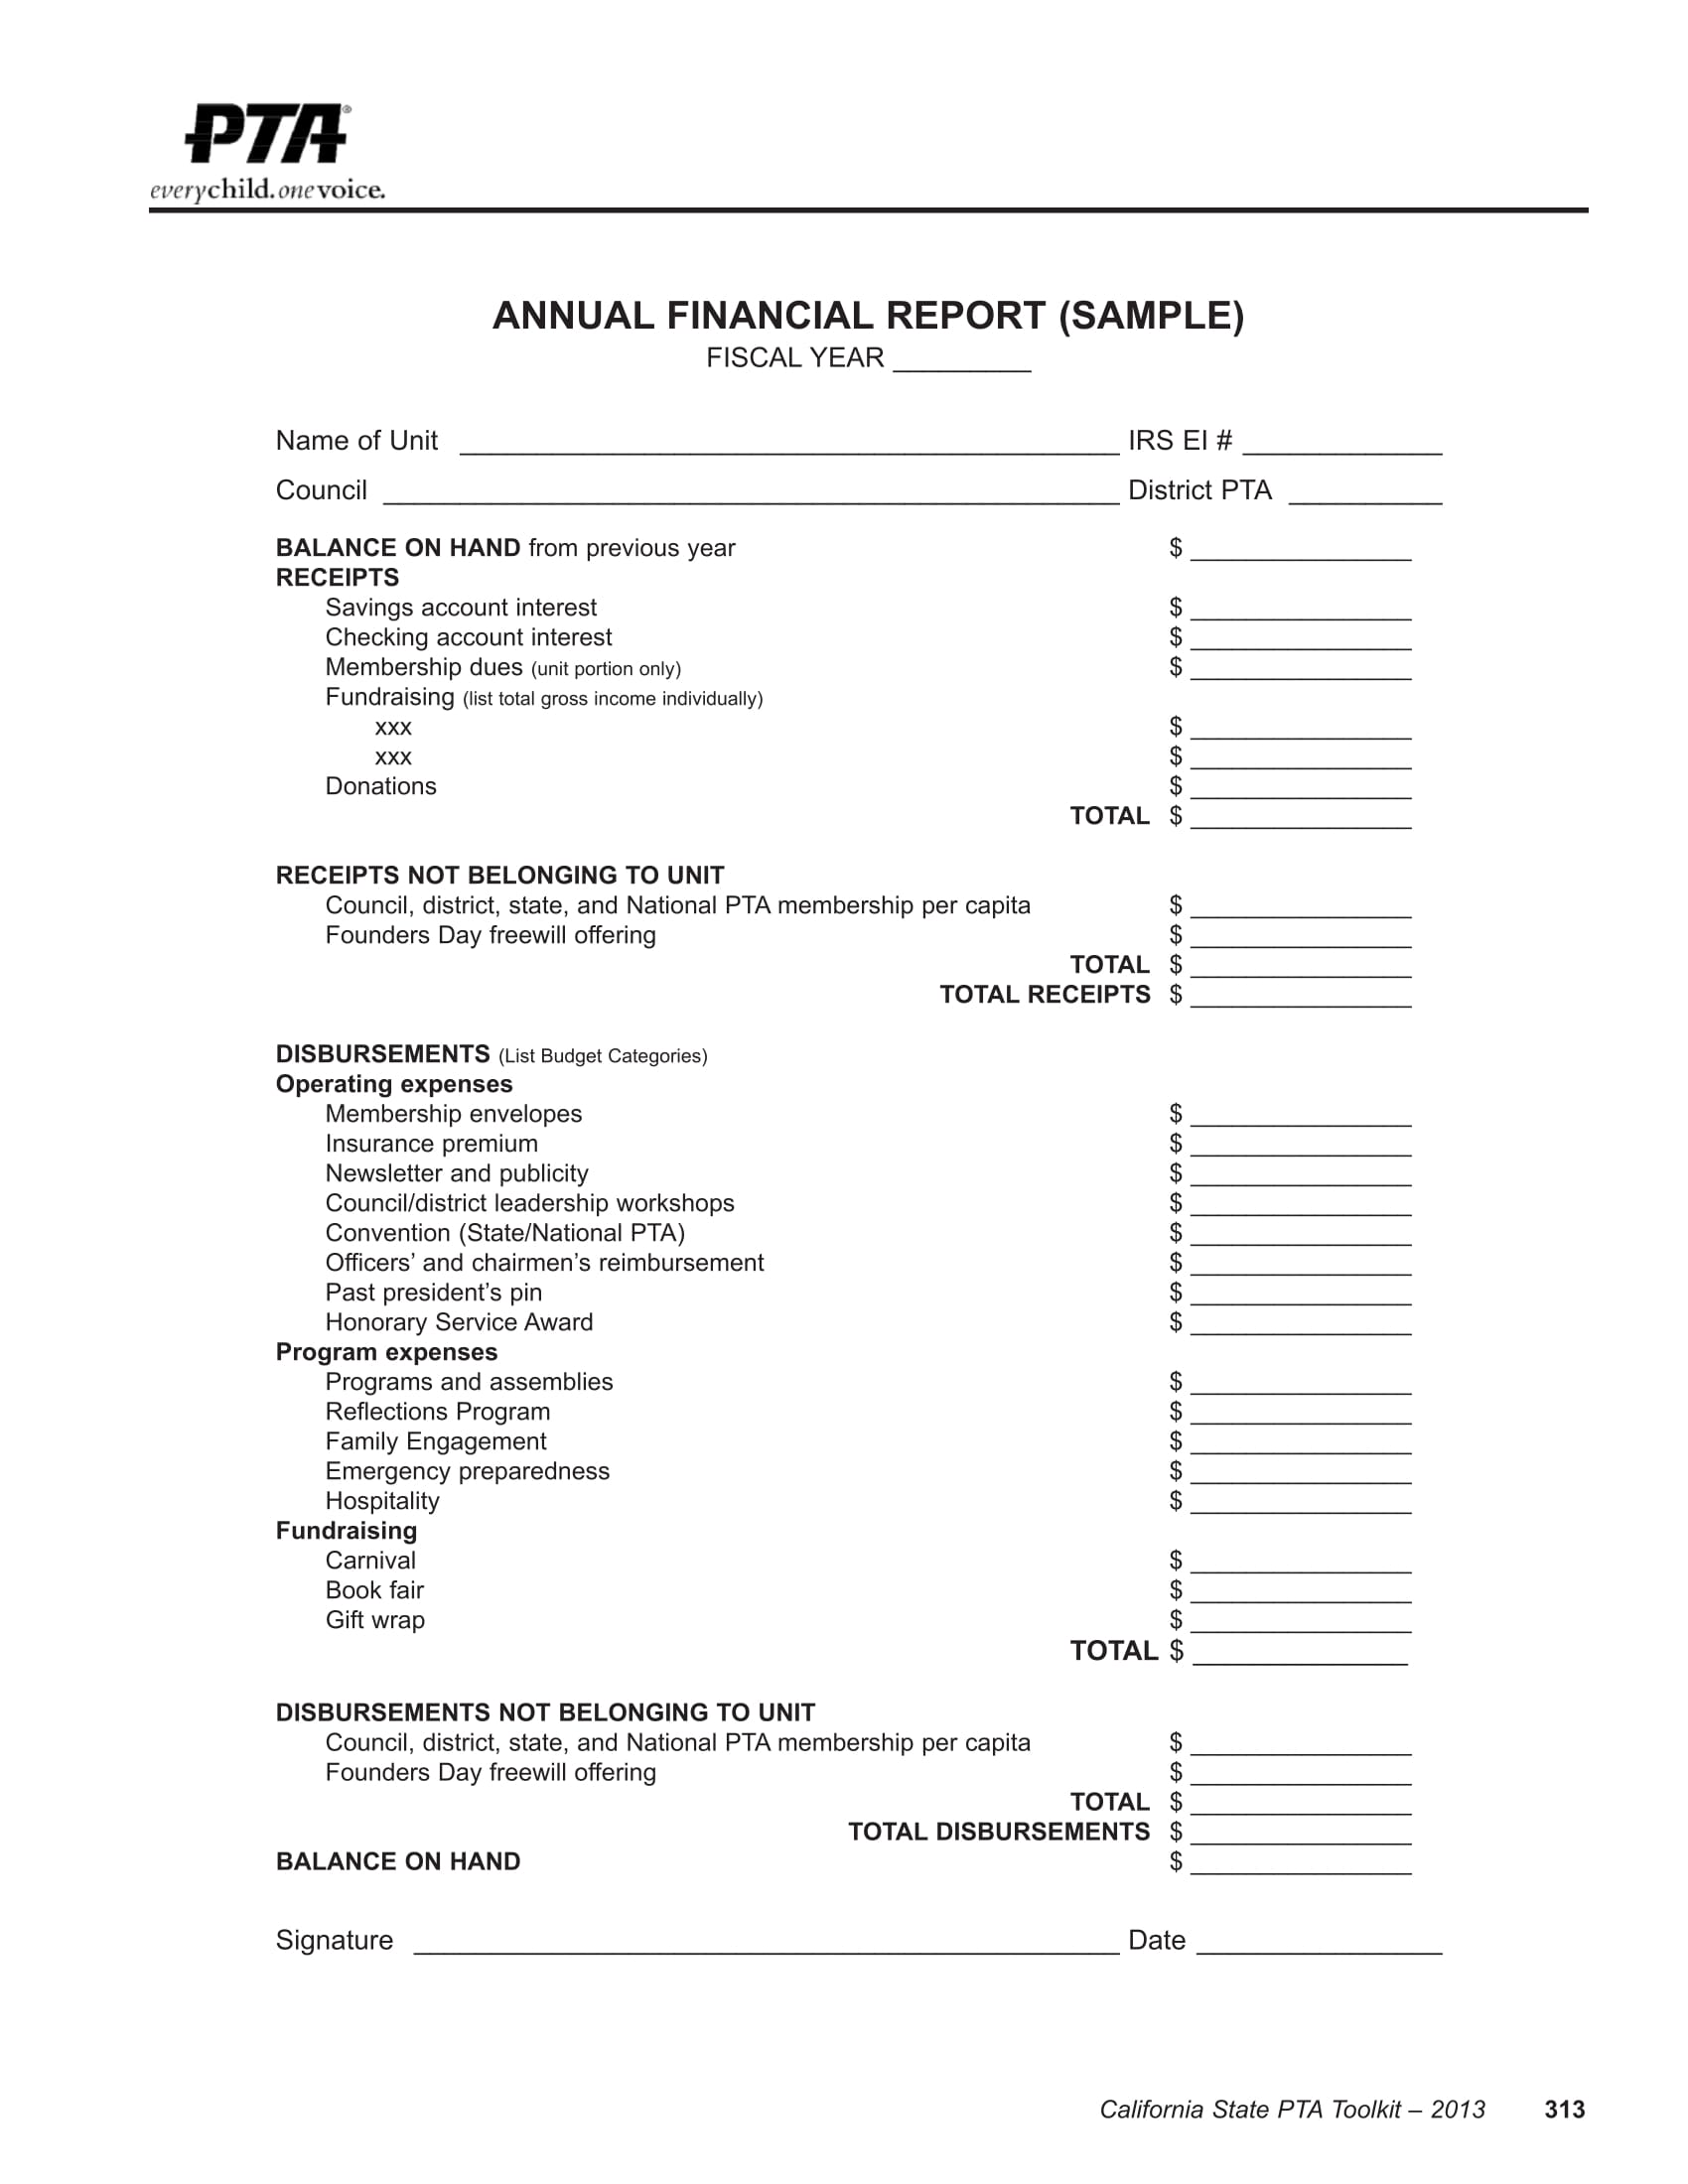 how to write a financial report for an organization